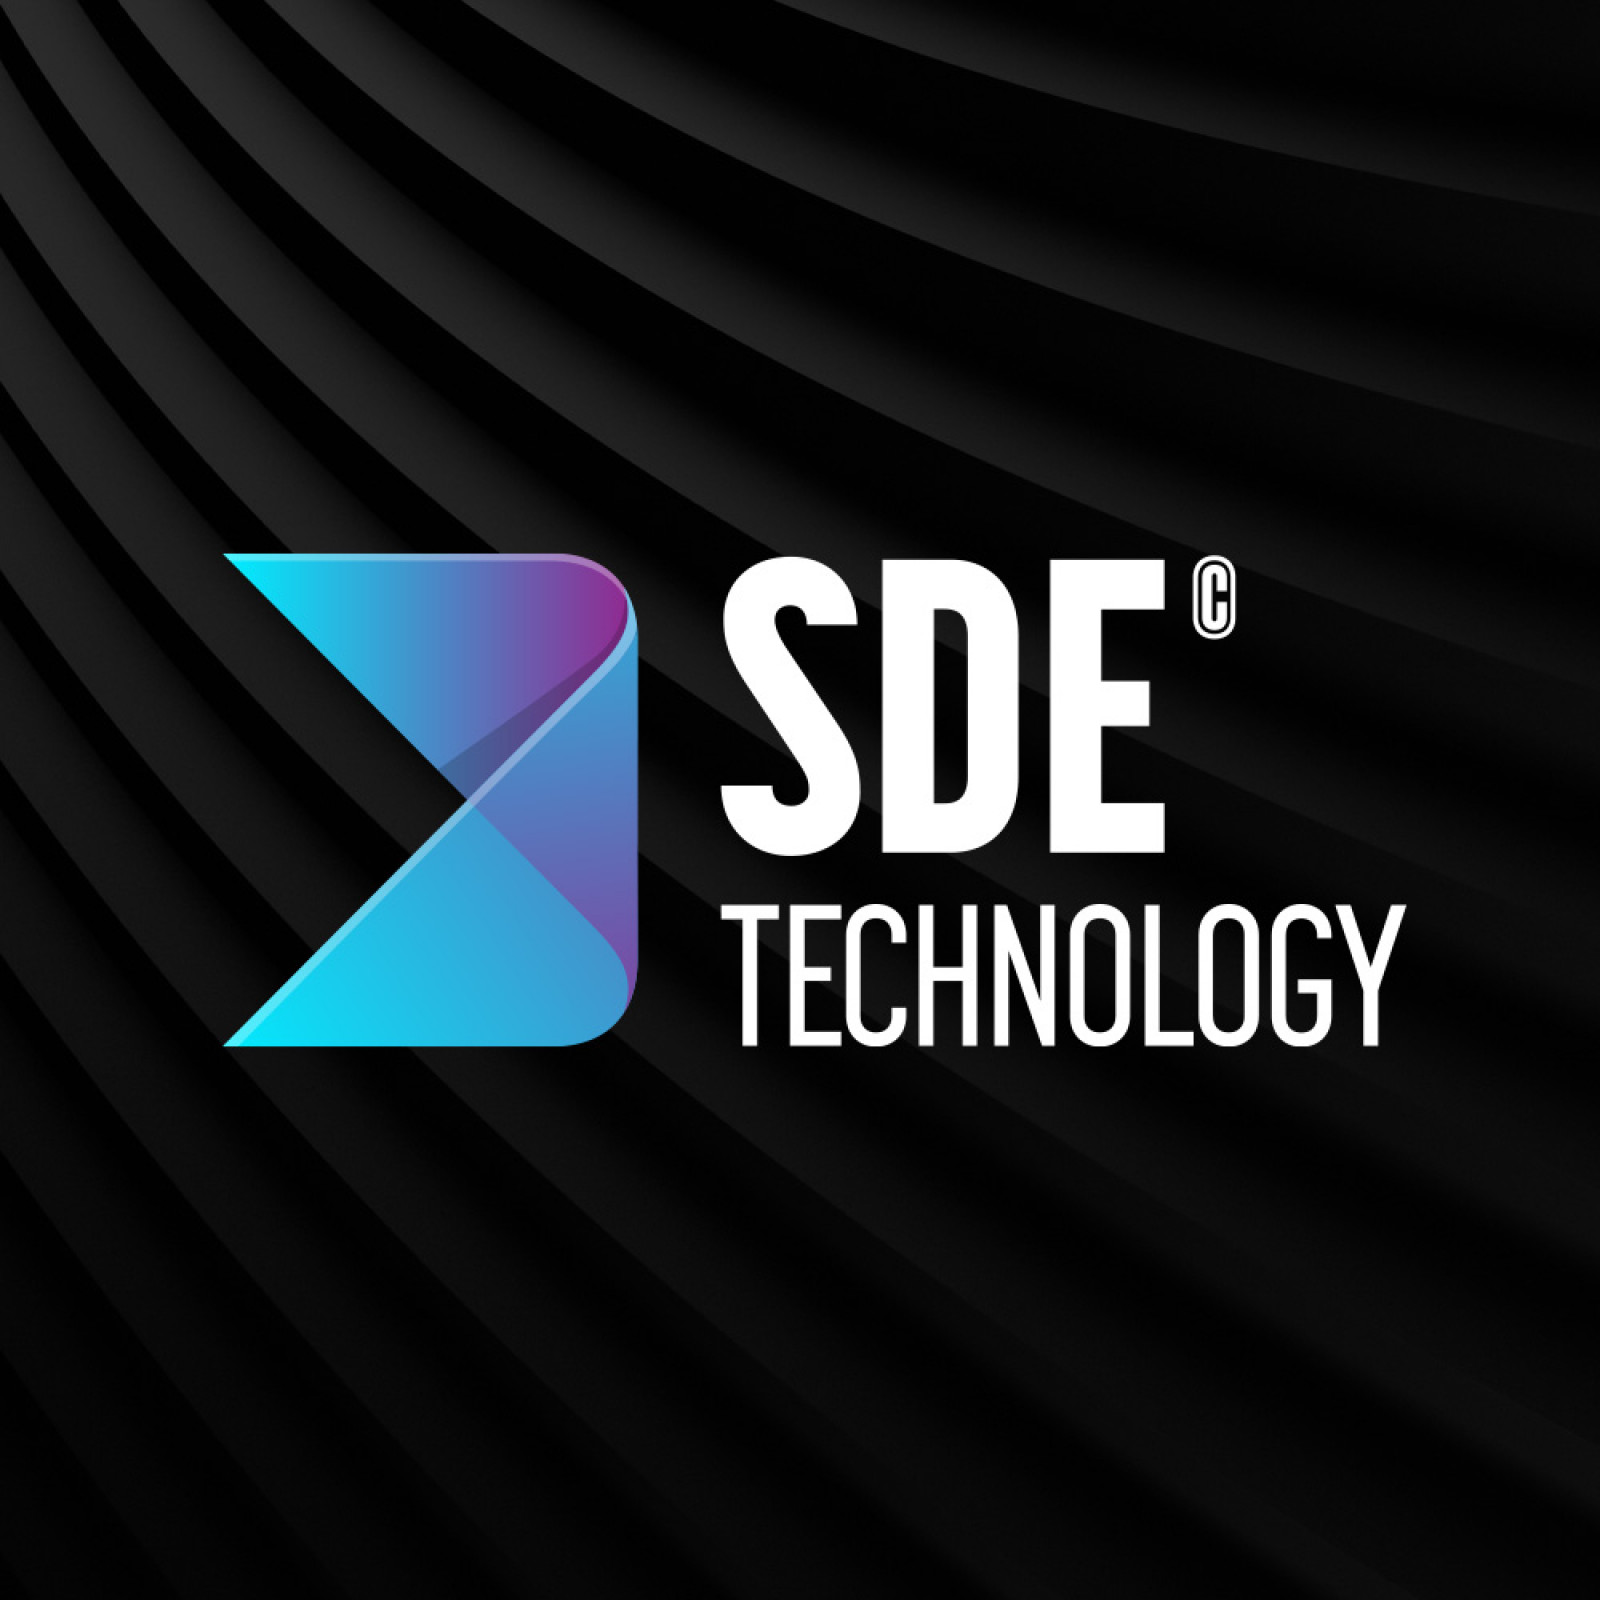 SDE Technology on ‘Skills need for Manufacturing’